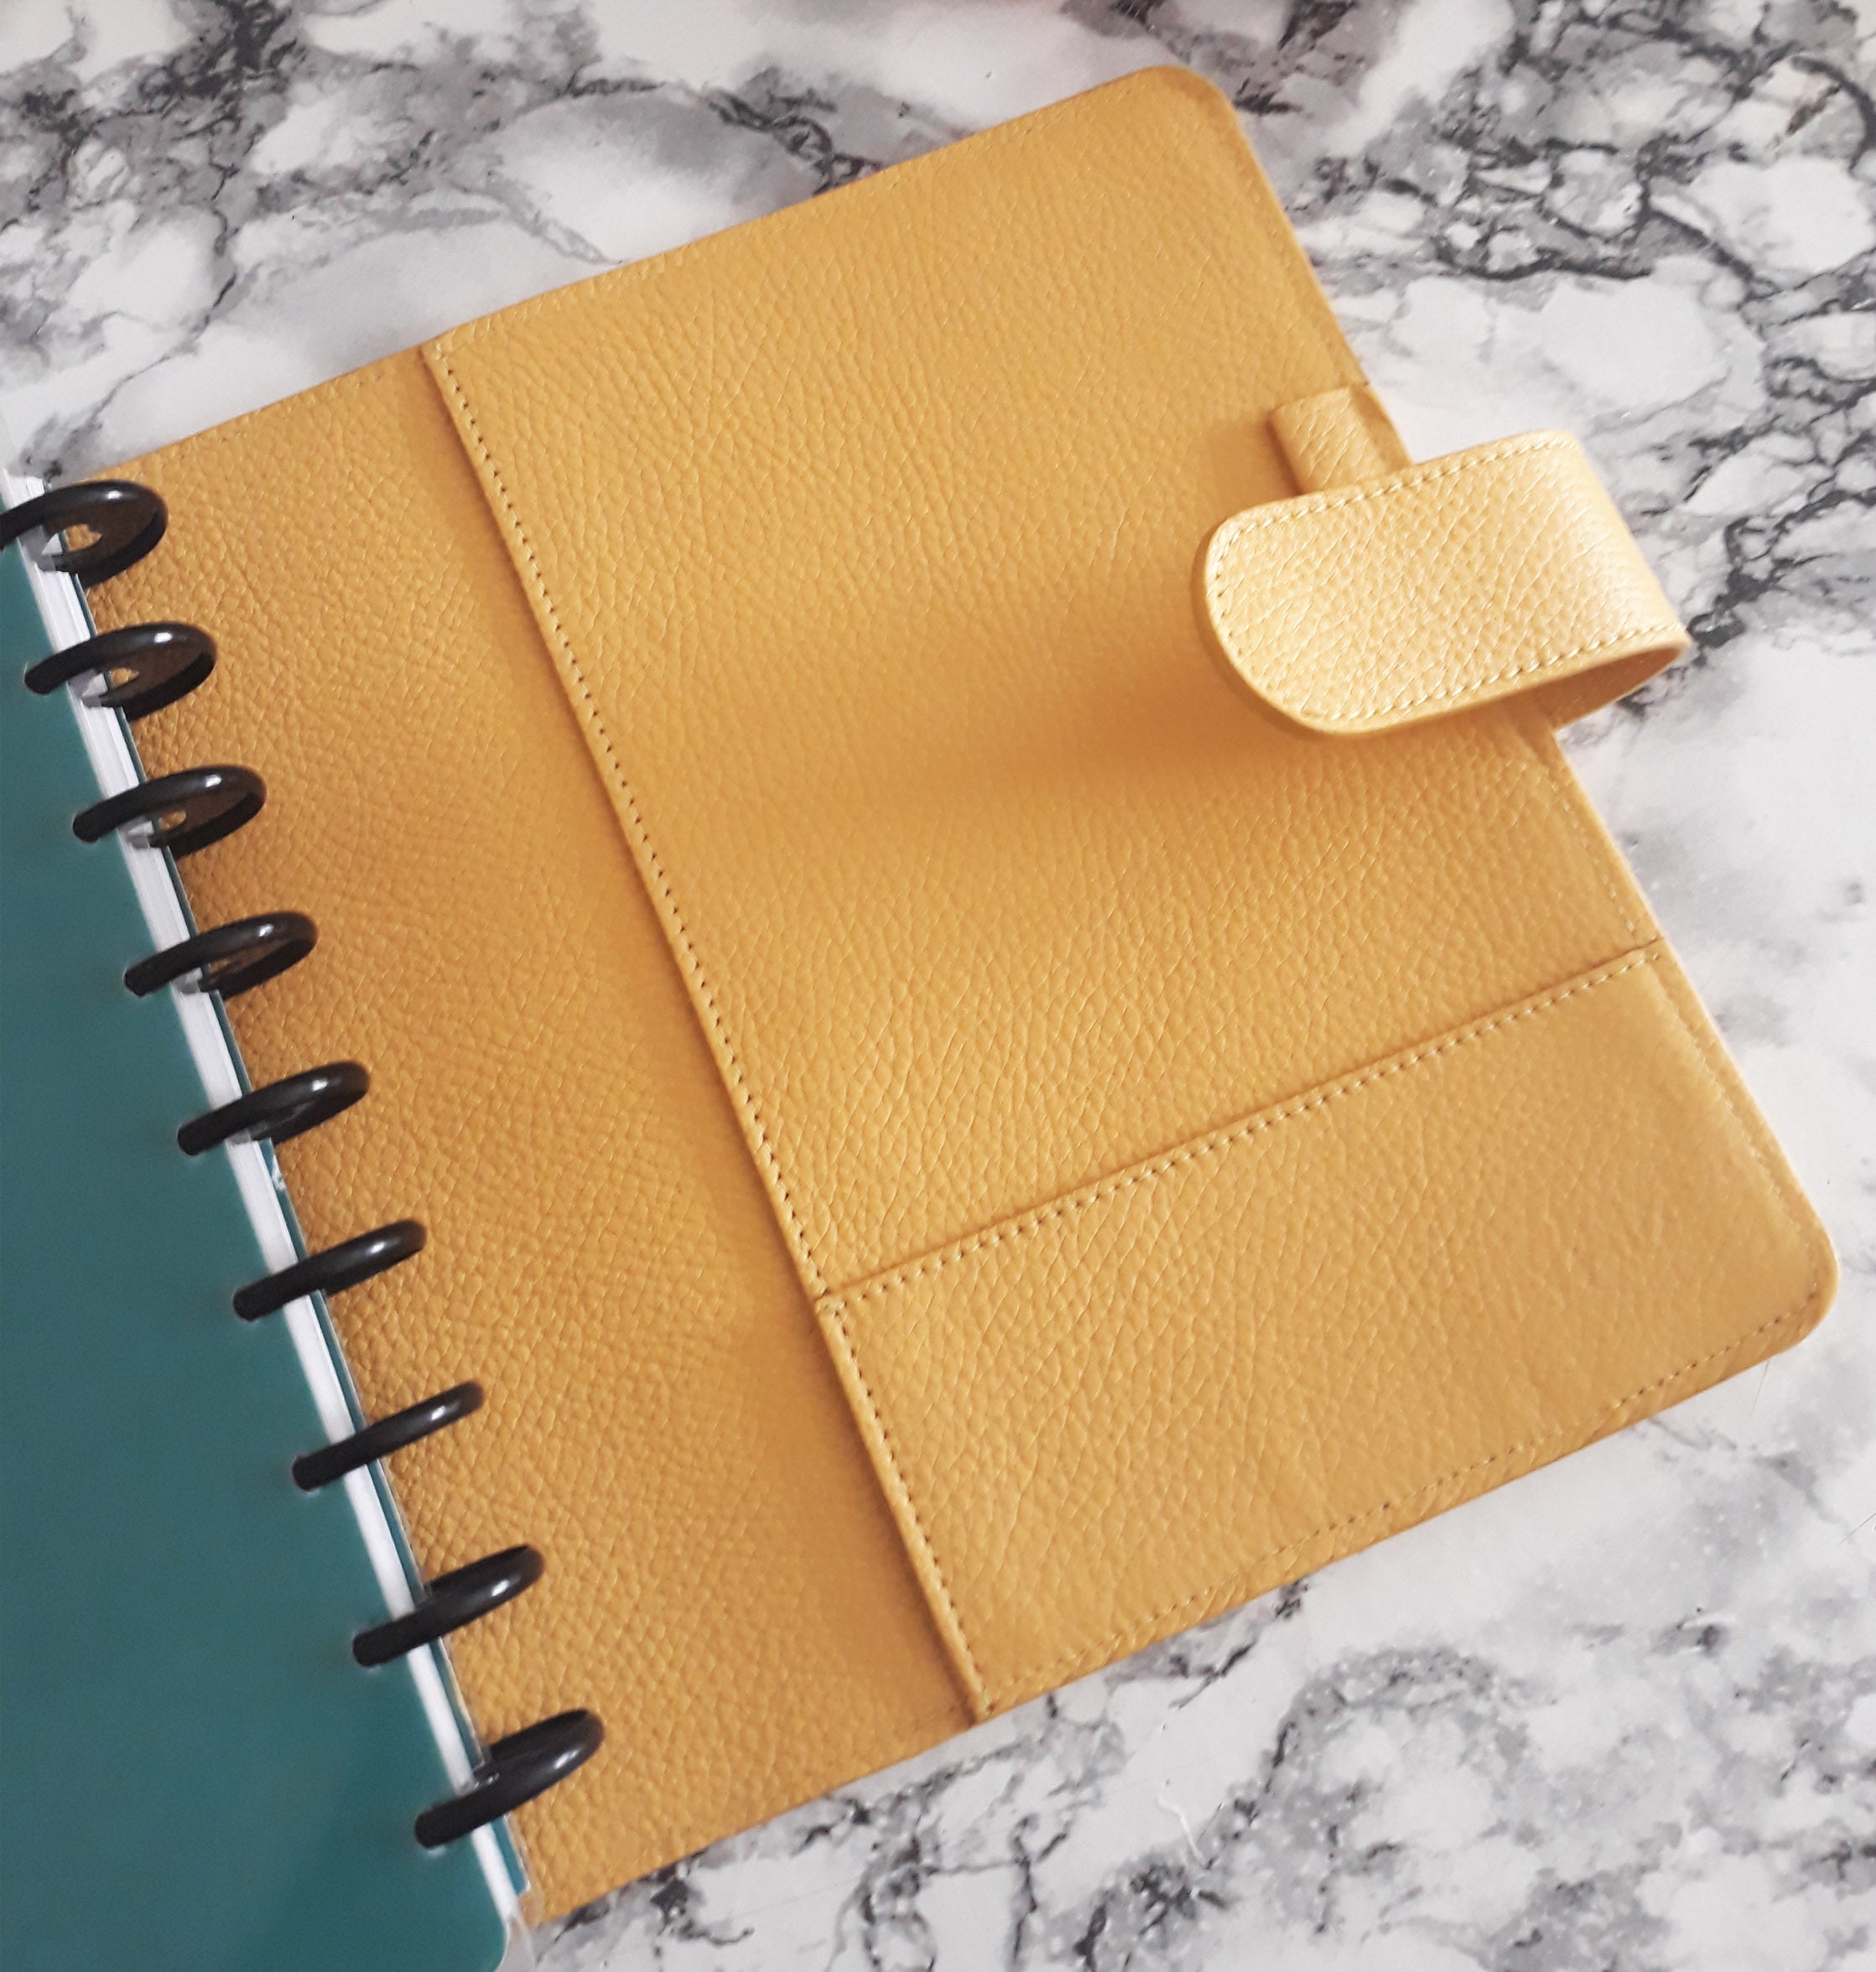 Custom Happy Planner Classic Cover in Sunflower leather